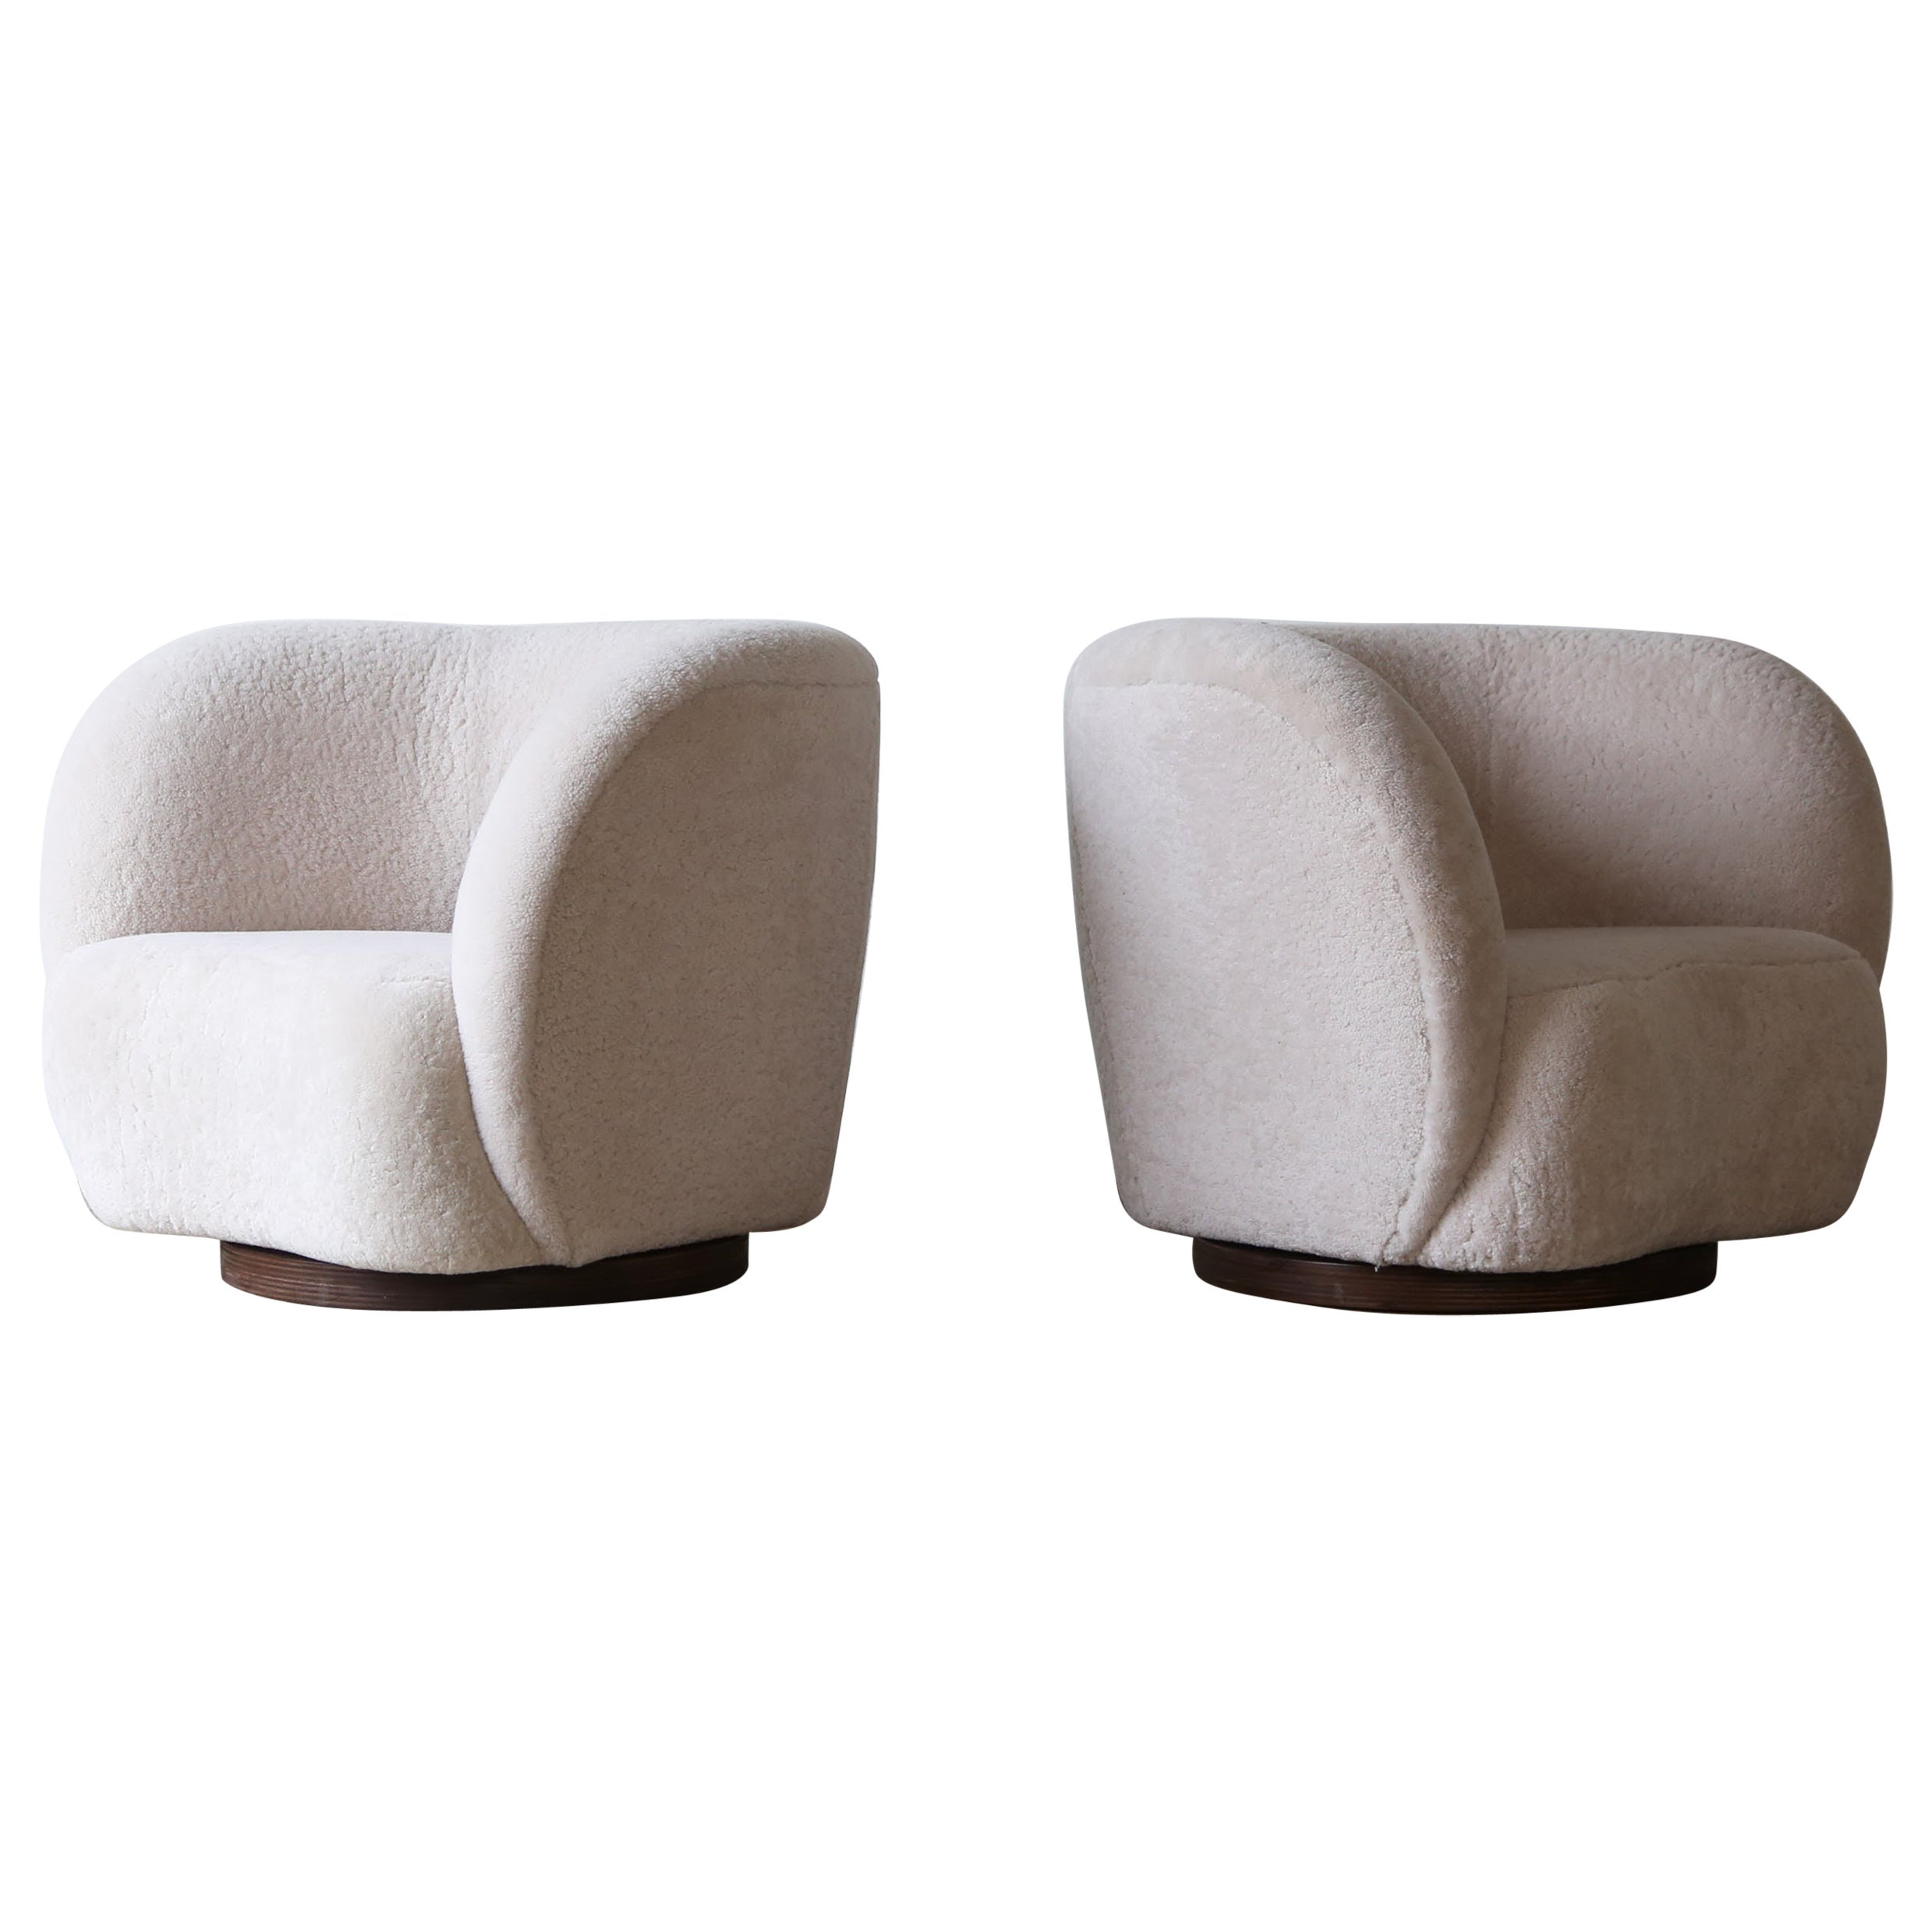 A Pair of Swivel Lounge Chairs in Natural Sheepskin Upholstery